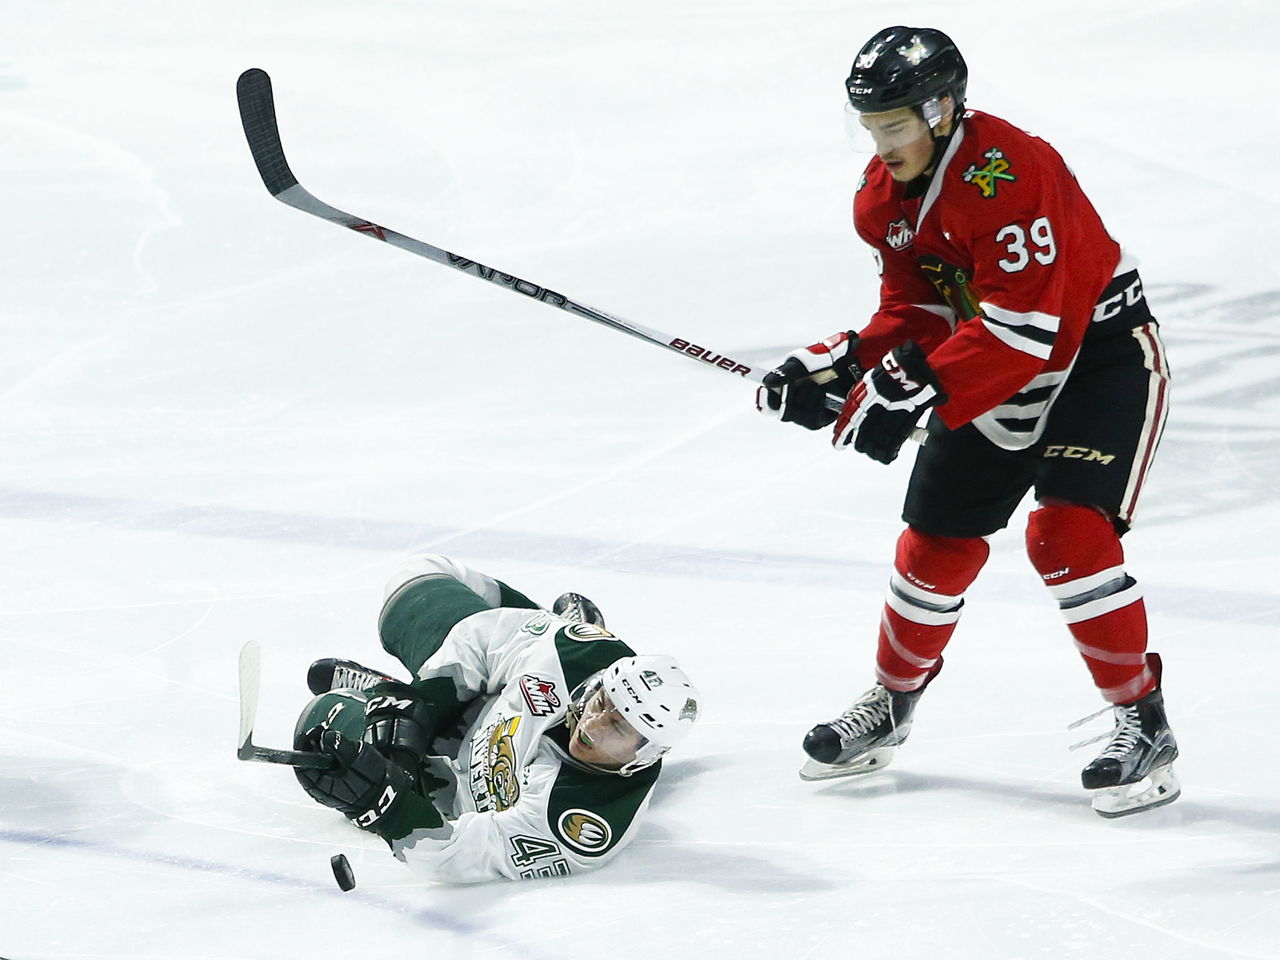 The Silvertips’ Connor Dewar (left) slides across the ice as Portland’s Colton Veloso (right) pursues the play during a game Wednesday at Xfinity Arena in Everett.